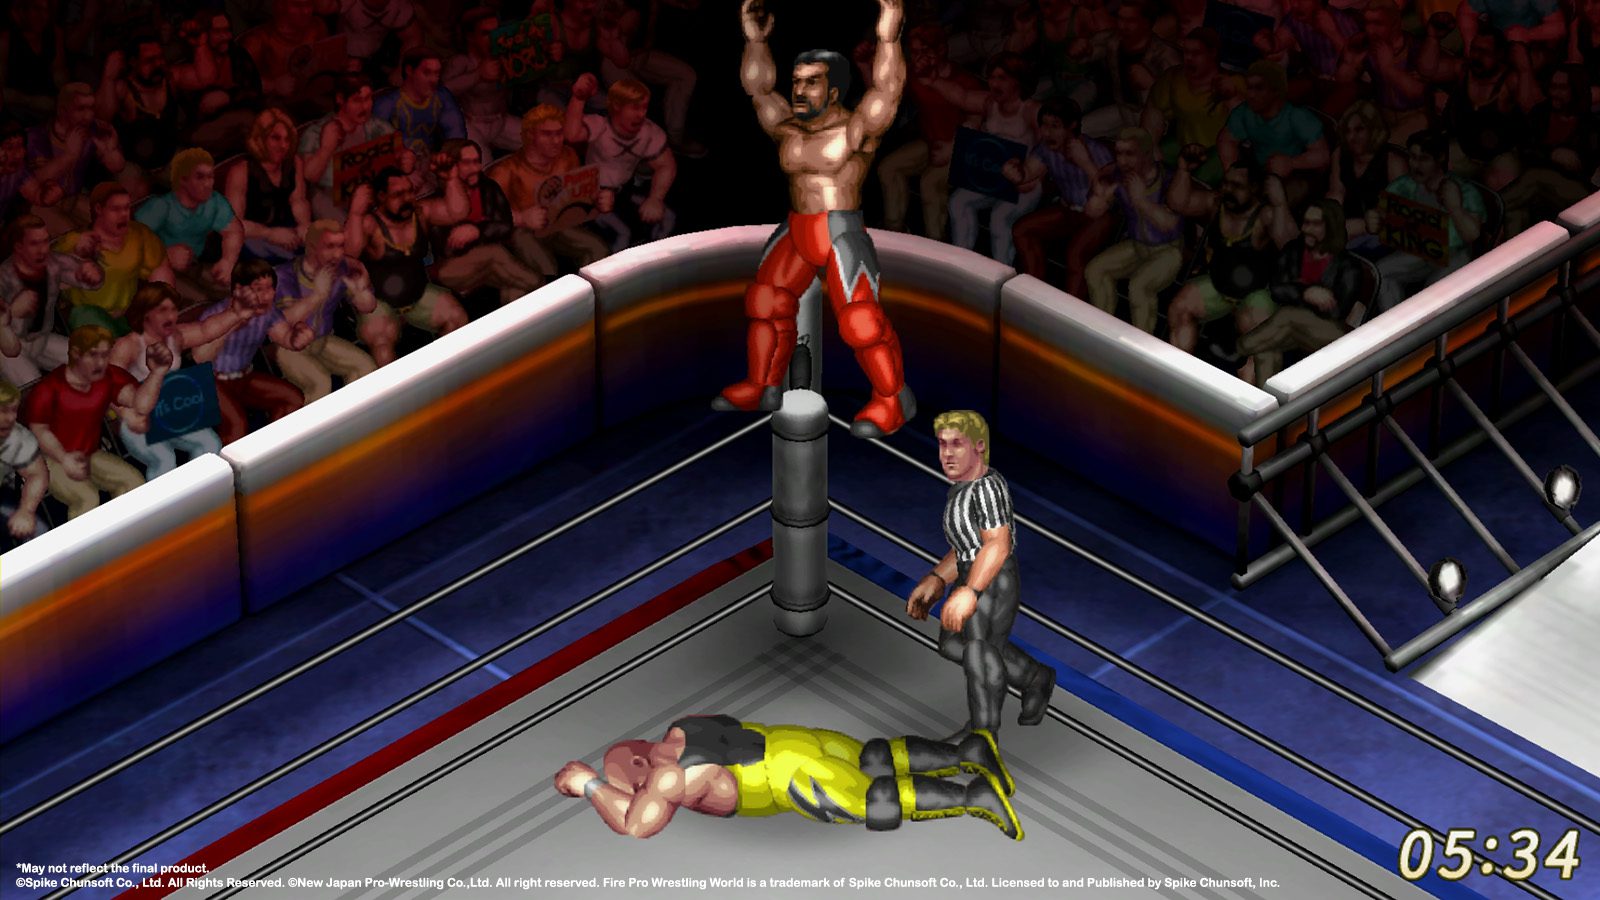 Fire Pro Wrestling World out now on PS4